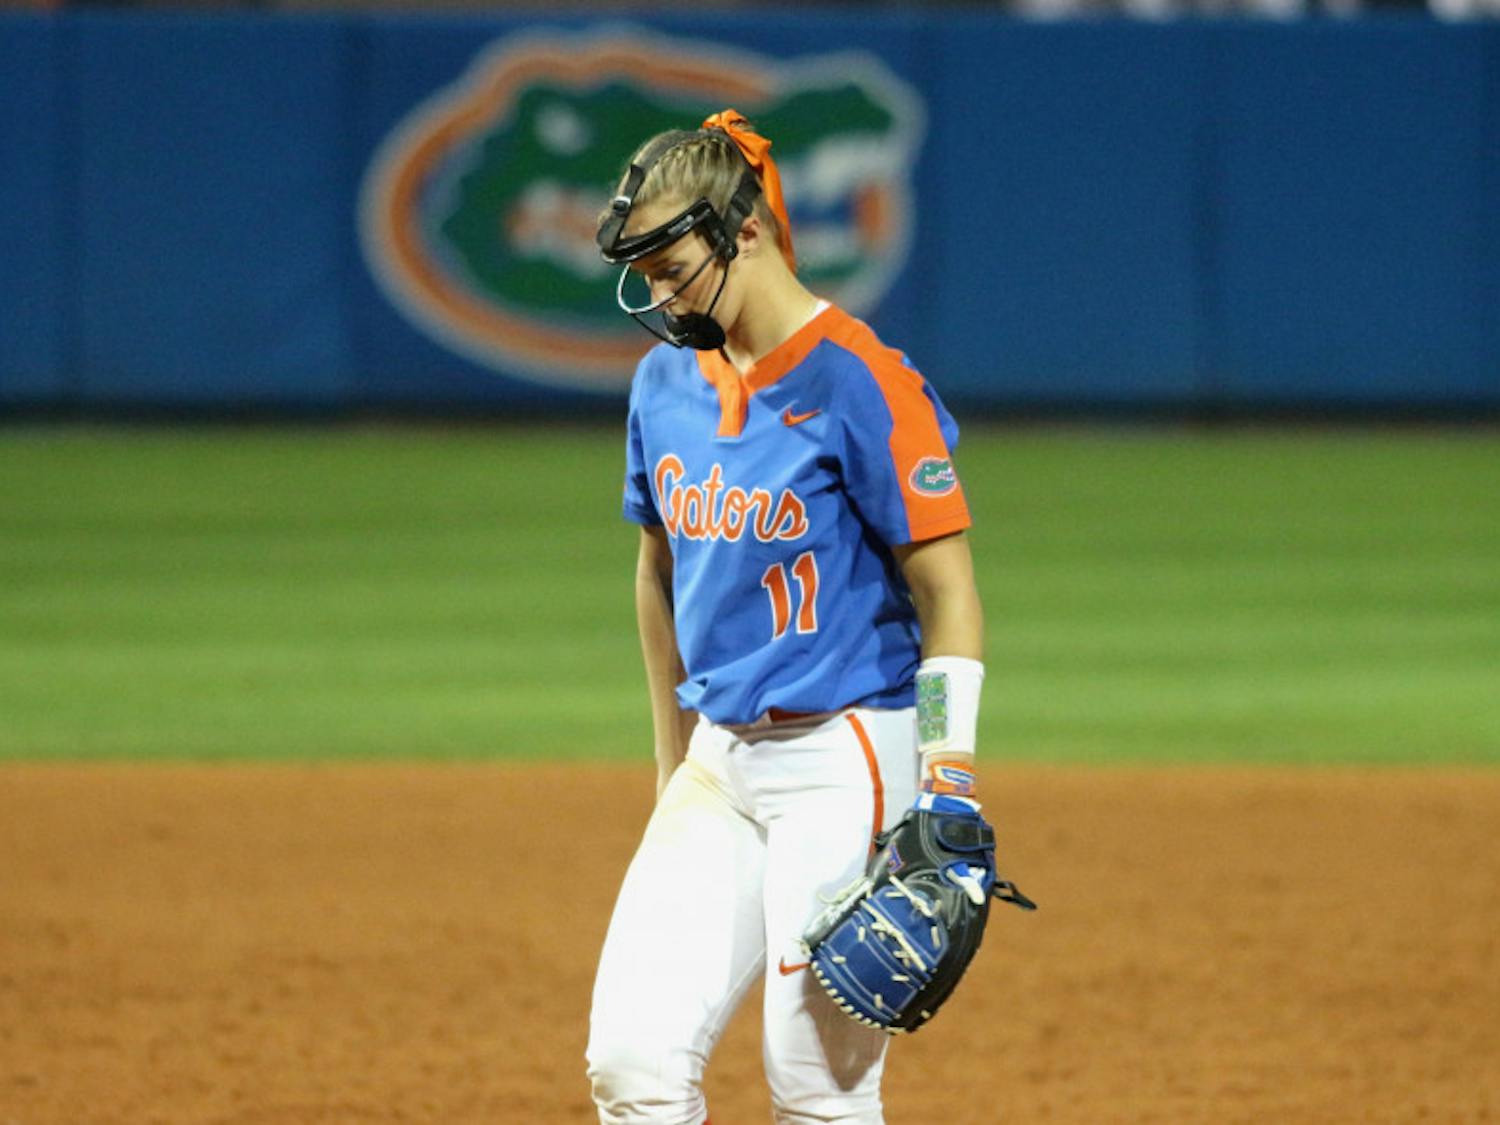 UF pitcher Kelly Barnhill recorded her 13th win of the season with 111 pitches against Texas A&amp;M, allowing only two hits while striking out 12 batters. "She doesn’t try to overtalk to herself. She doesn’t try to overdo it,” Walton said.